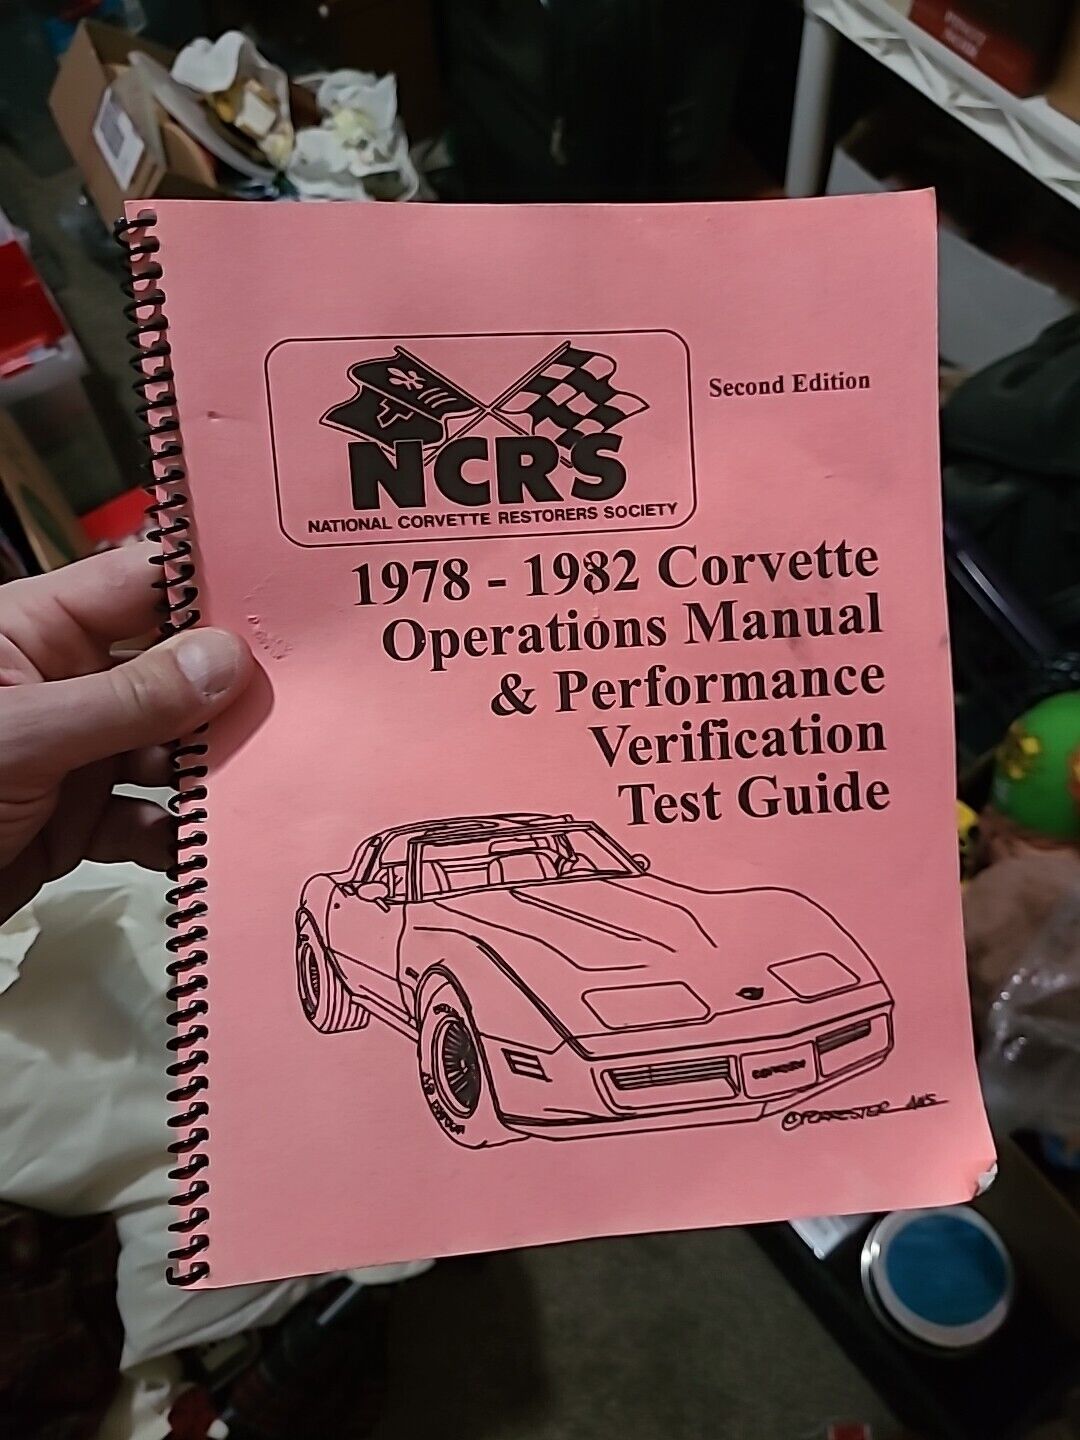 1978-1982 Corvette Operations Manual & Performance Verification Test Guide NCRS